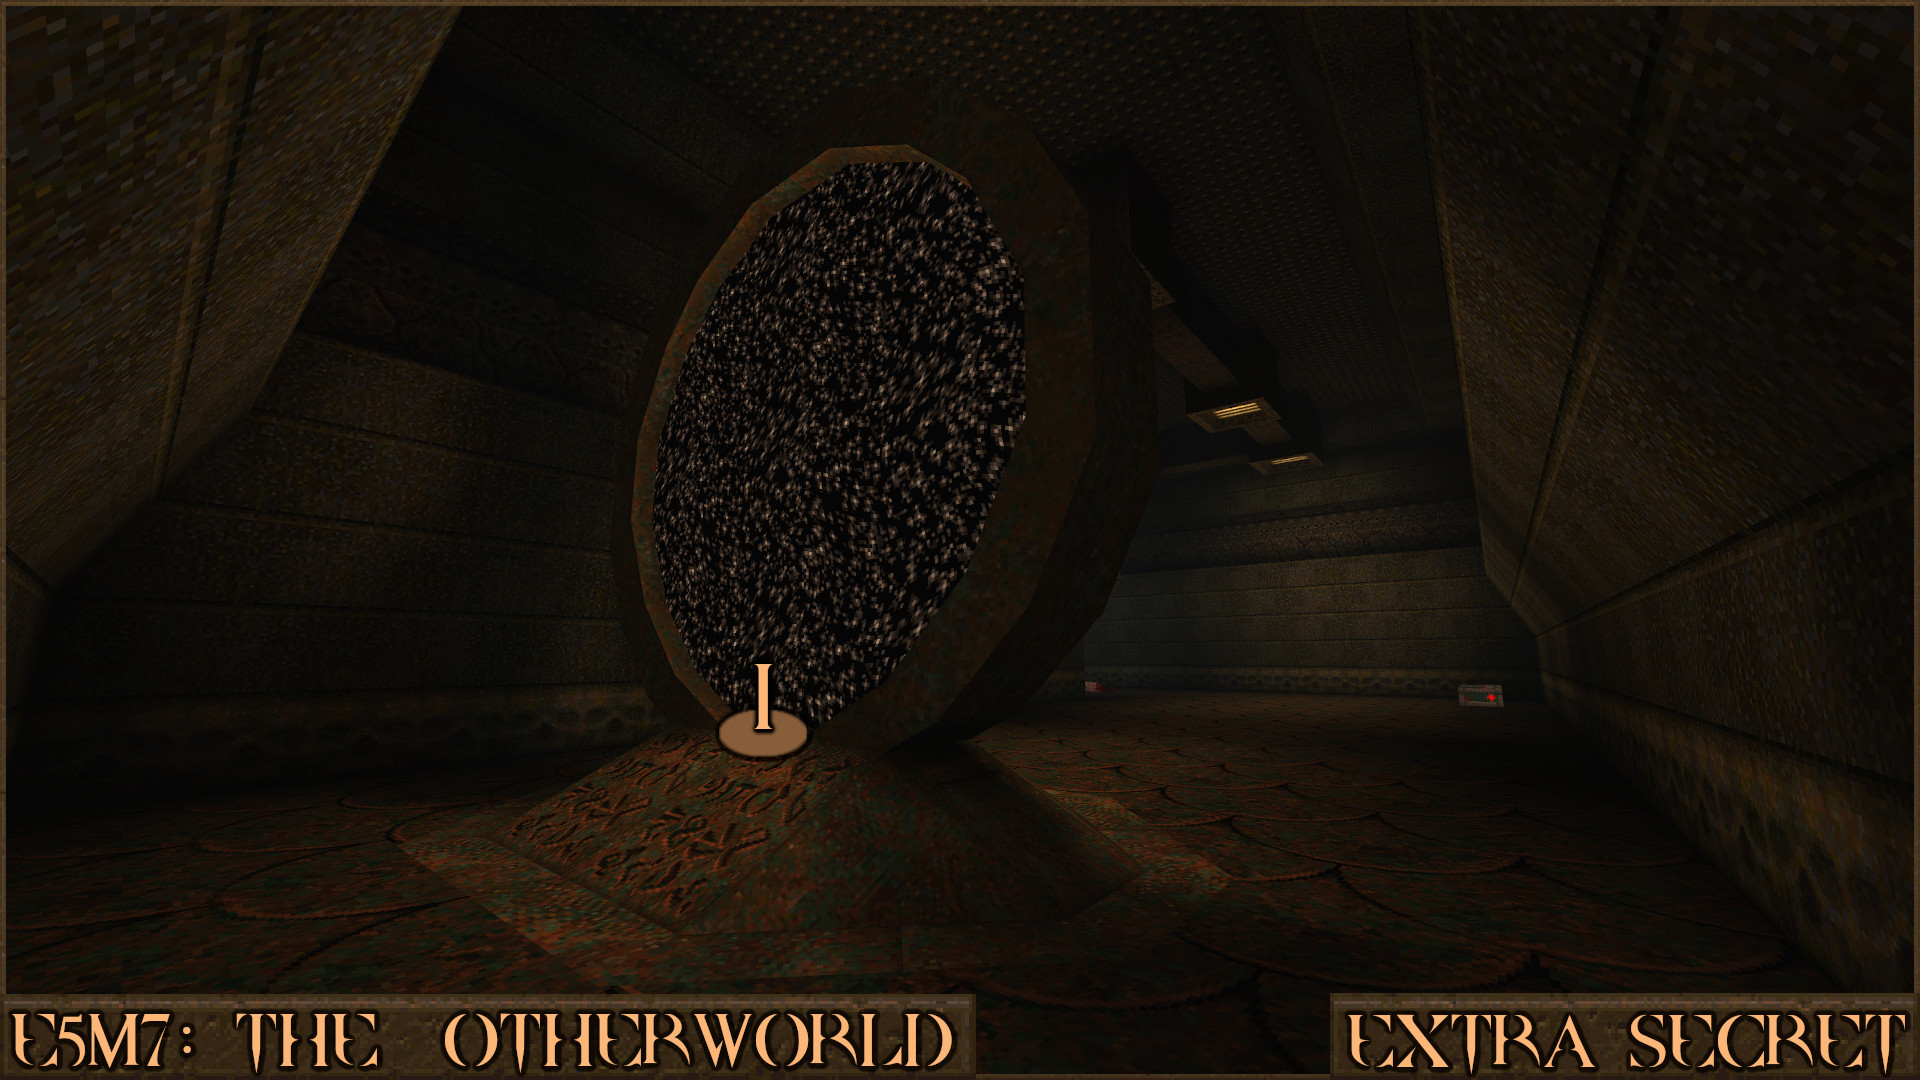 Quake Finding All Secrets in Quake Expansion pack: Dimension of the Past - E5M7: The Otherworld - C7D48CD